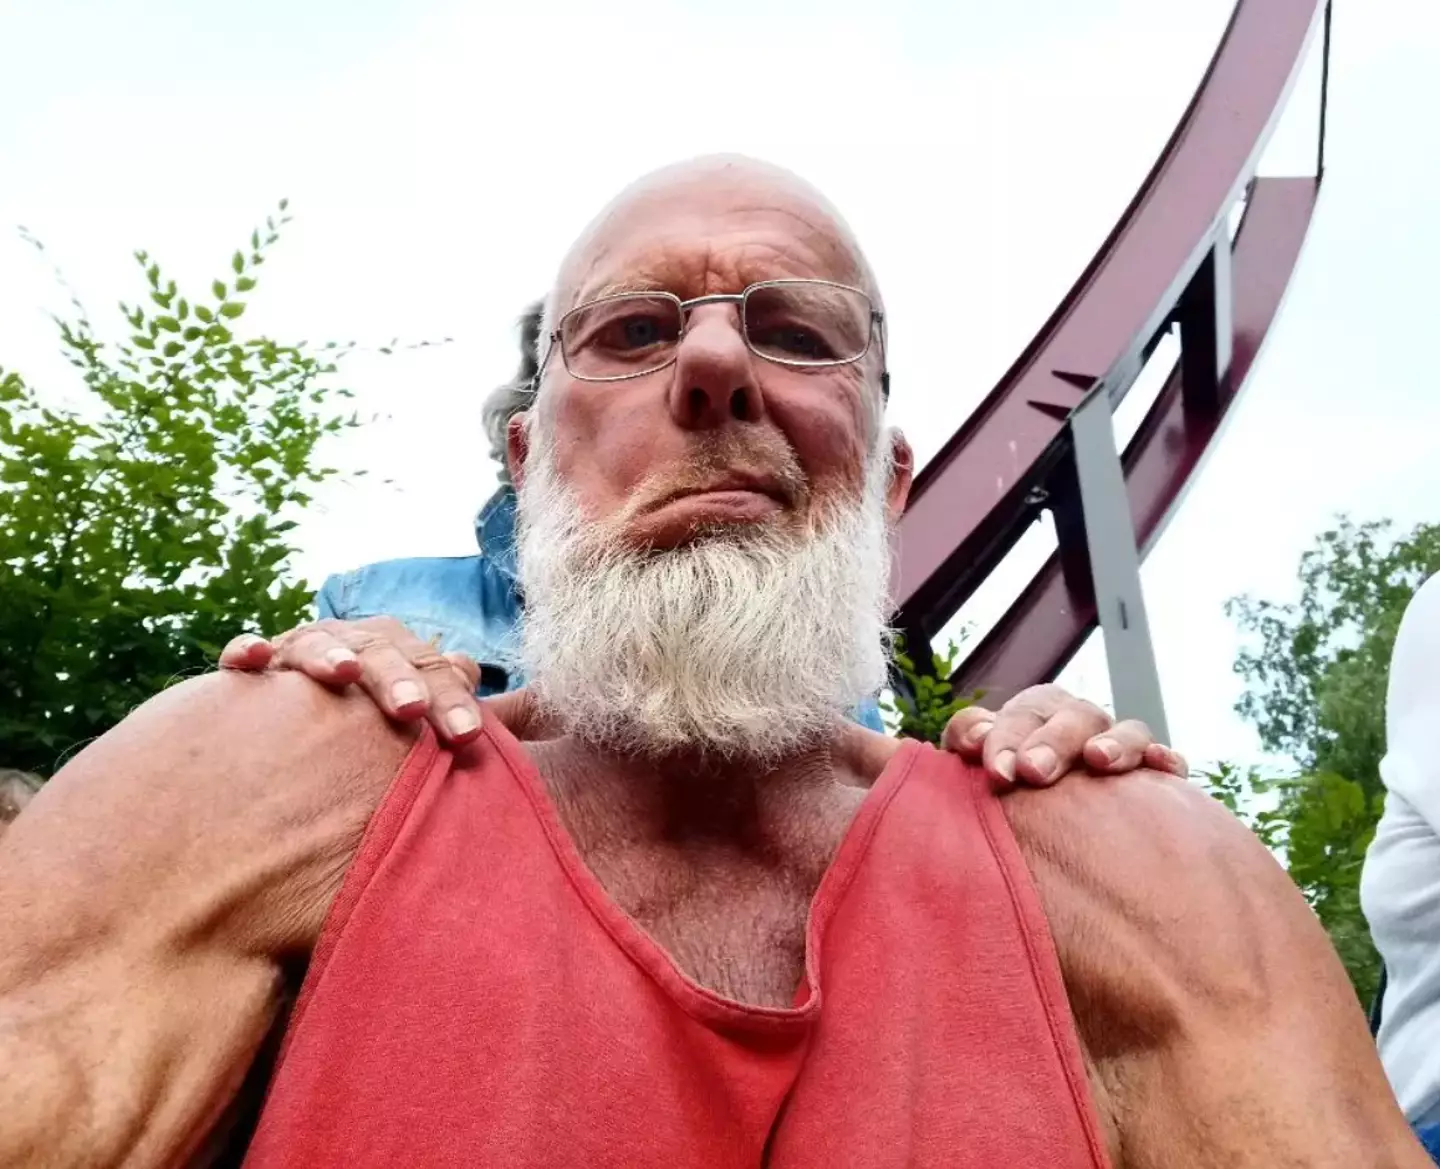 The hunky grandad is causing a storm on OnlyFans.